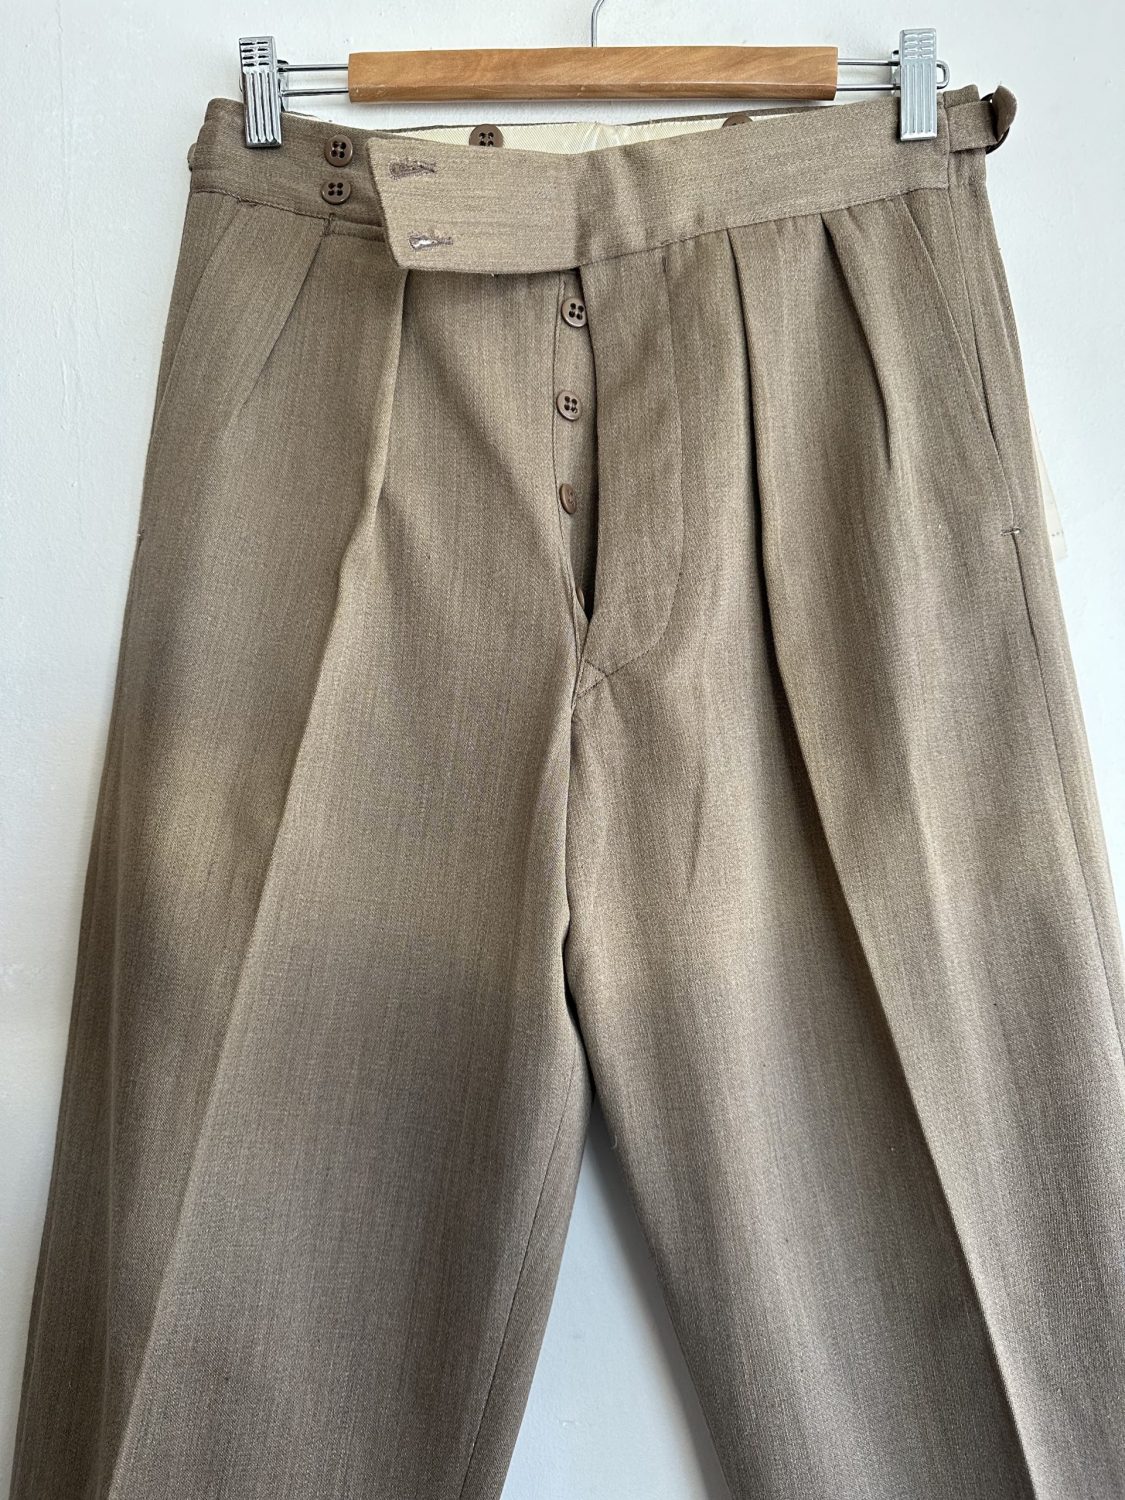 Vintage Style 1930s 1940s Trousers in Wool Tweed High Waist and Pleated  Front, Vintage Pants in Grey Pure Yorkshire Wool Barleycorn Tweed - Etsy  India